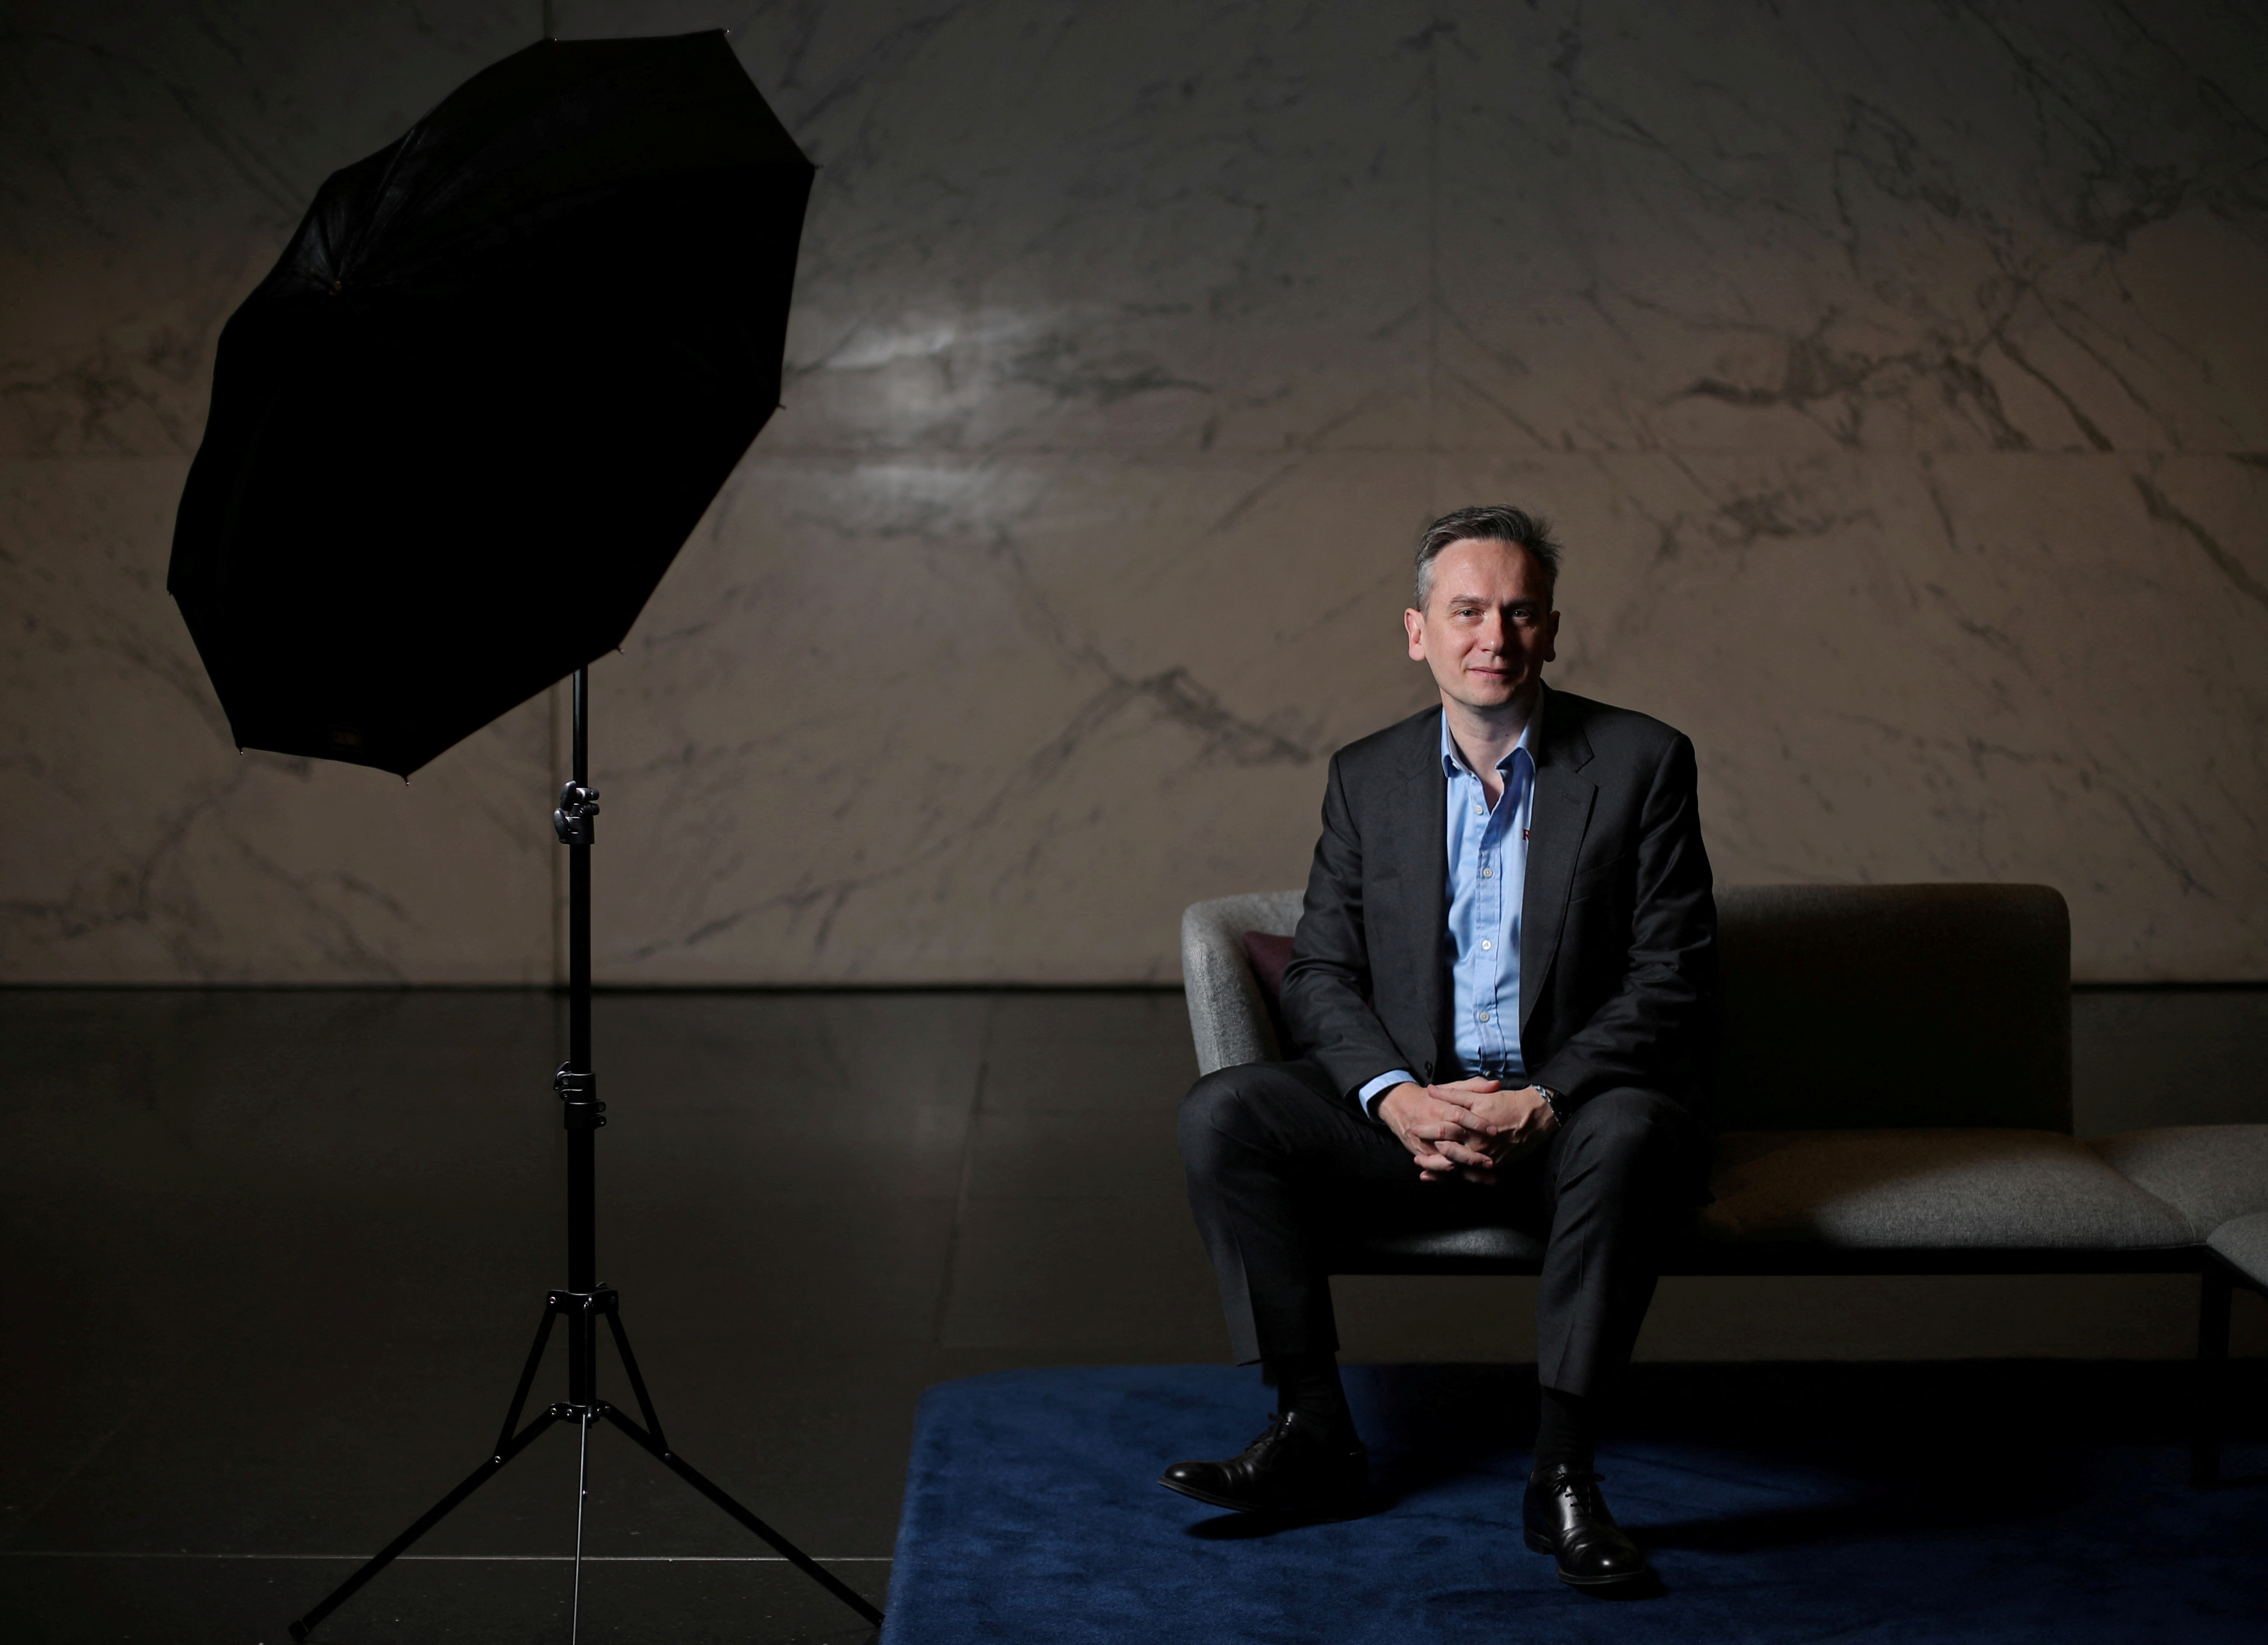 Jean-Sebastien Jacques, CEO of Rio Tinto Group poses for a portrait ahead of the publication of the company 2019 full year results in London